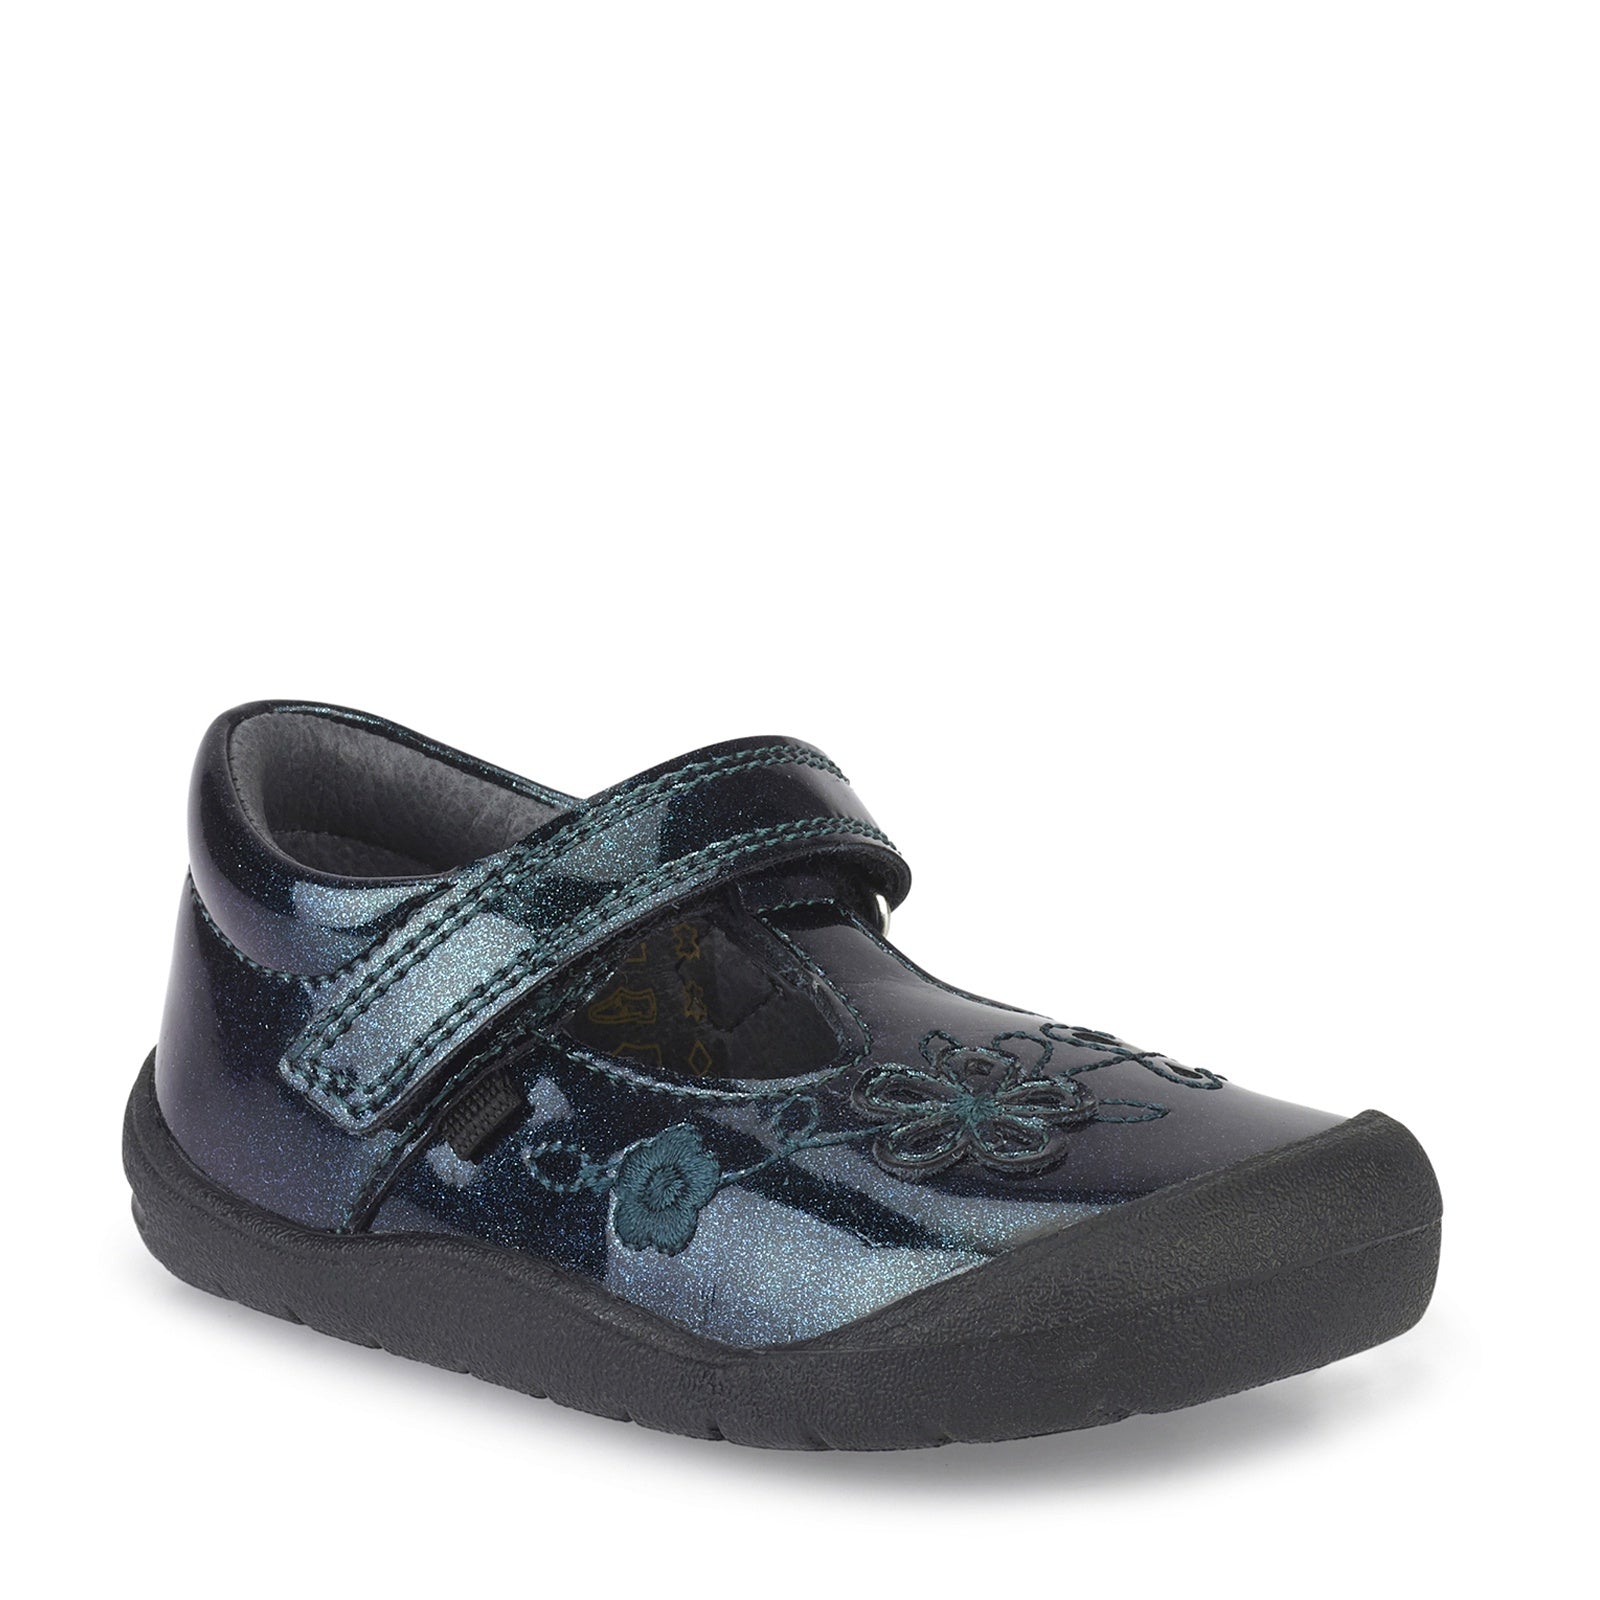 Start-Rite First Mia 0743-3 Girls Black Patent Leather T-Bar First Shoe - elevate your sole